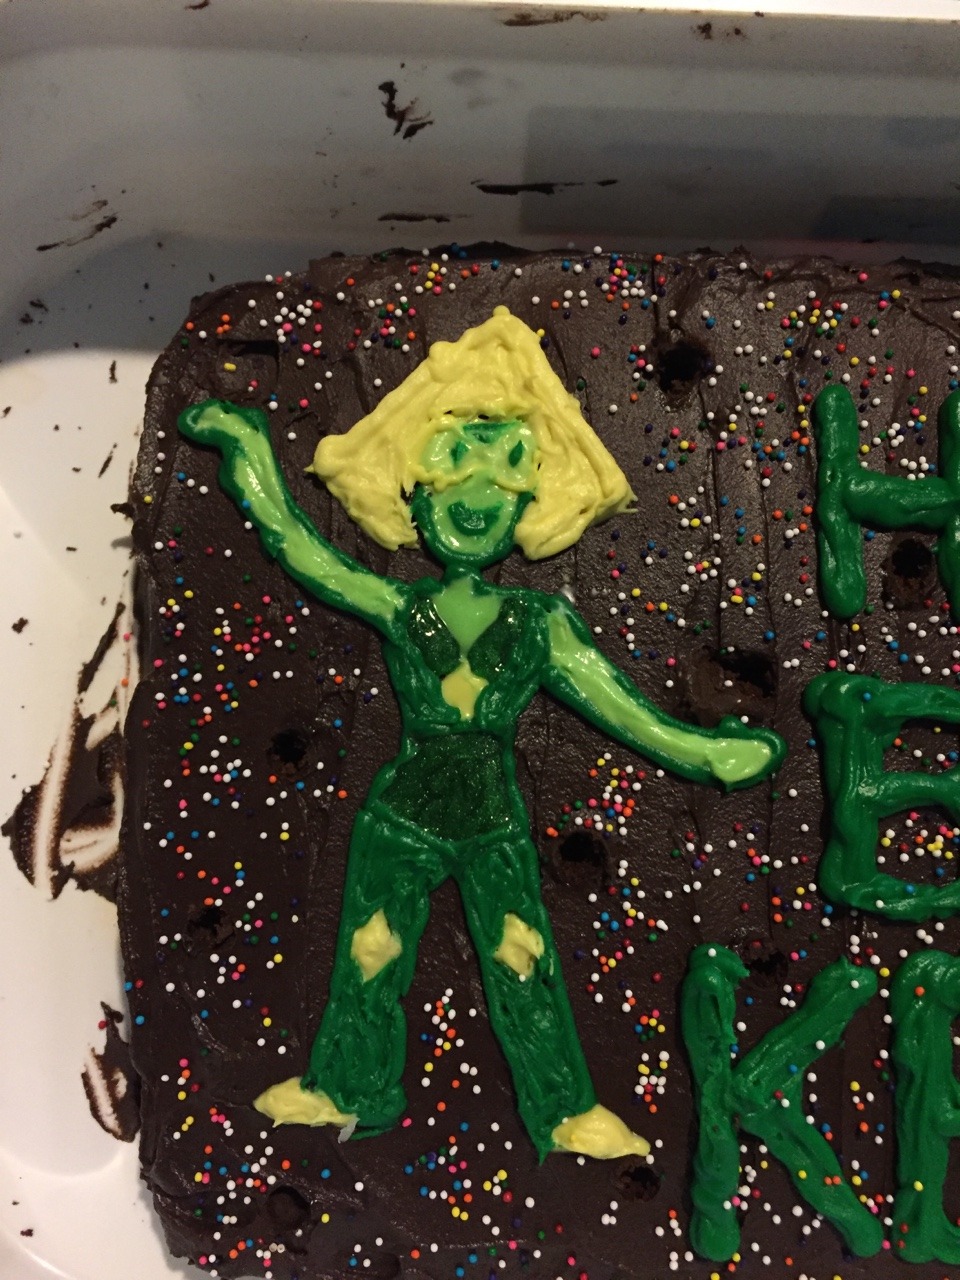 A peridot that I did on my cousins birthday cake!